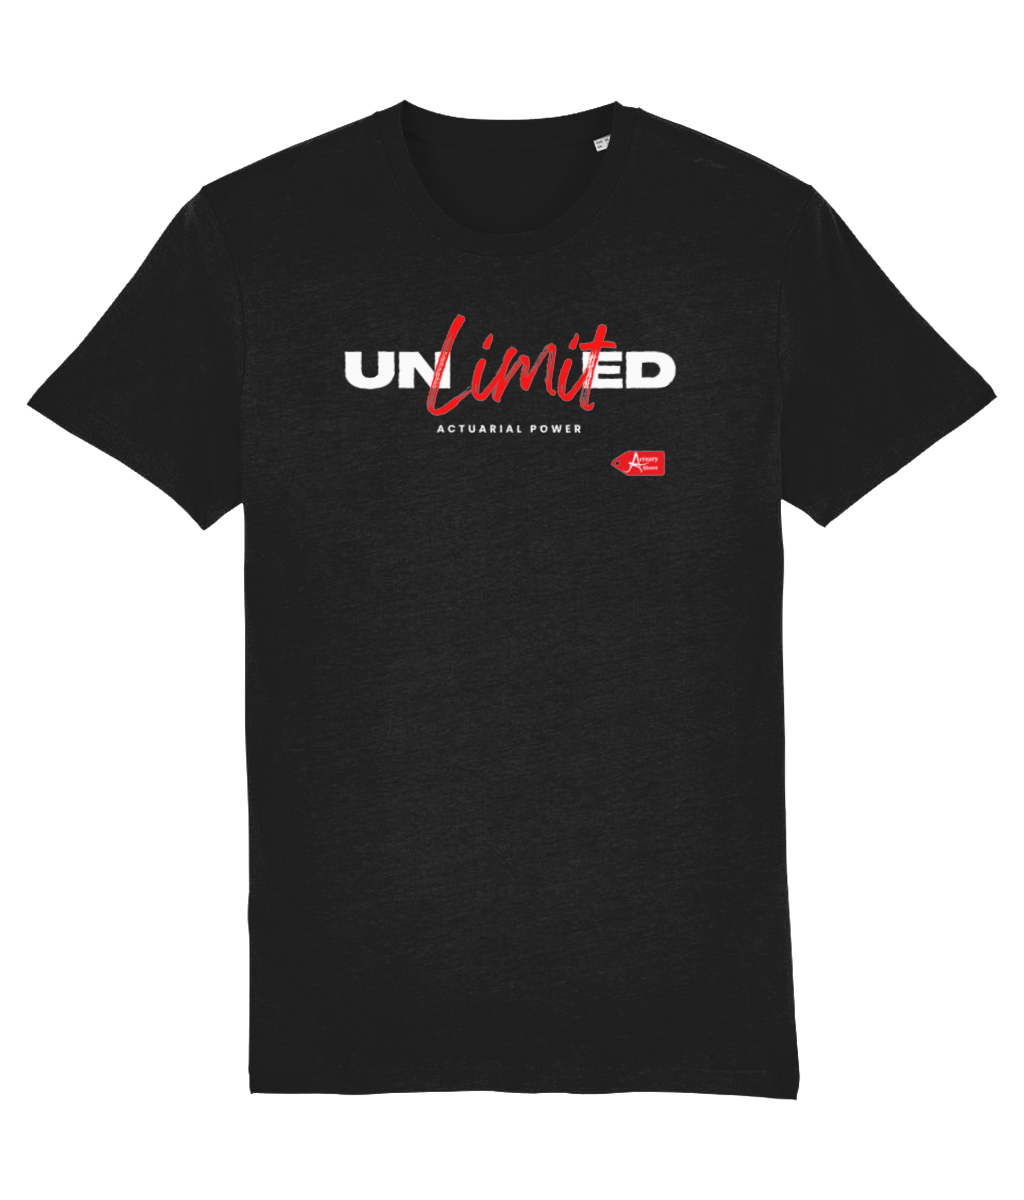 Unlimited Actuarial Power T Shirt